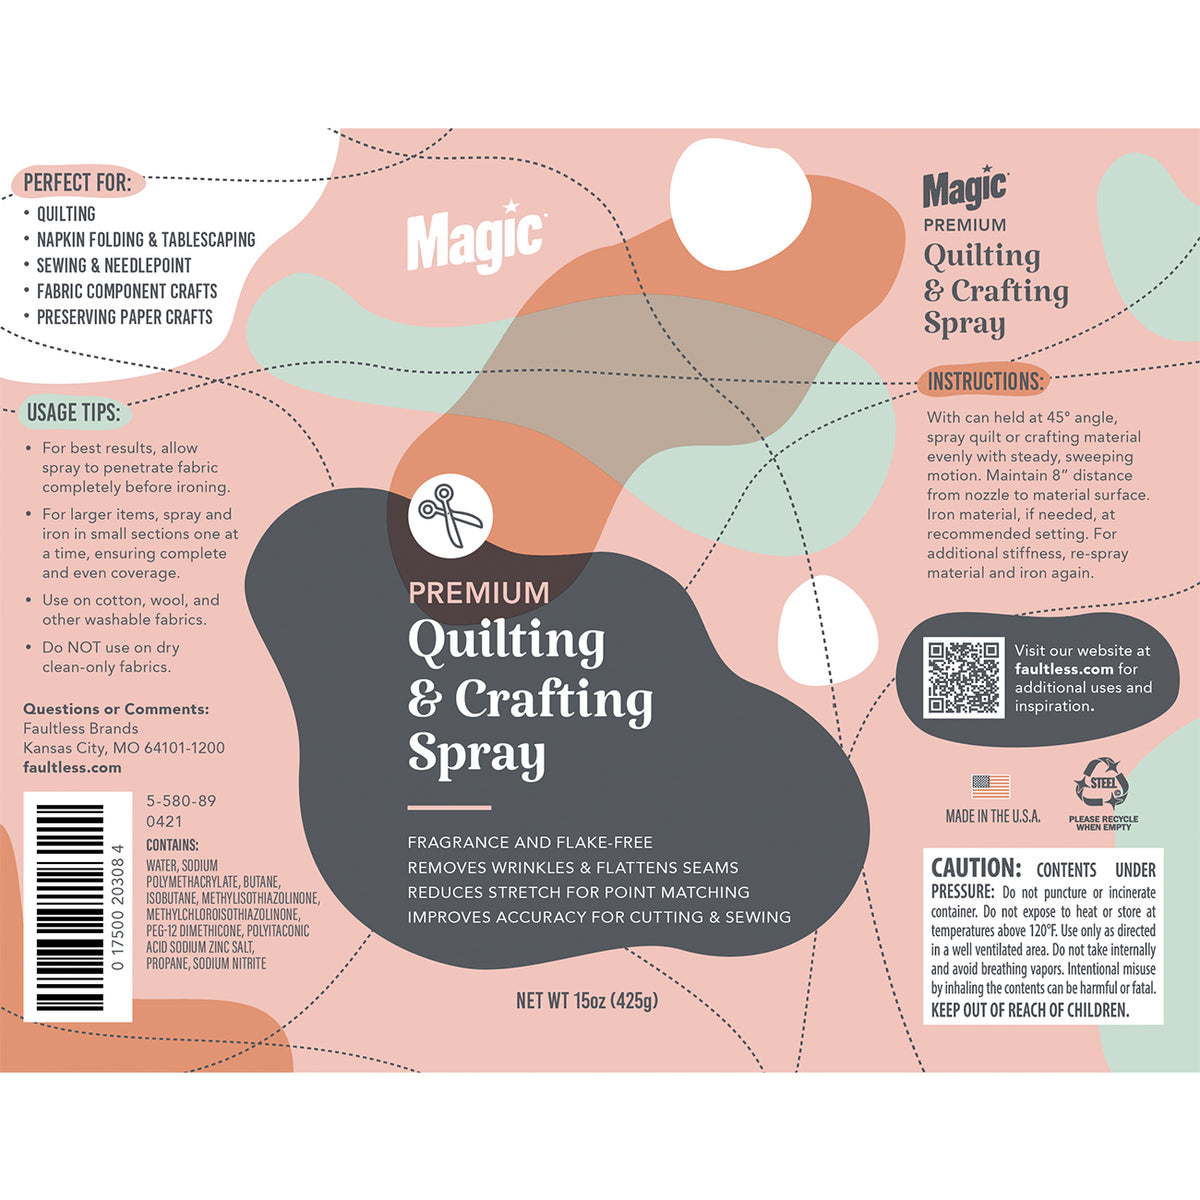 Magic Premium Quilting & Crafting Spray Bottle Fabric Spray for Cutting,  Creasing, & Sewing Best Press